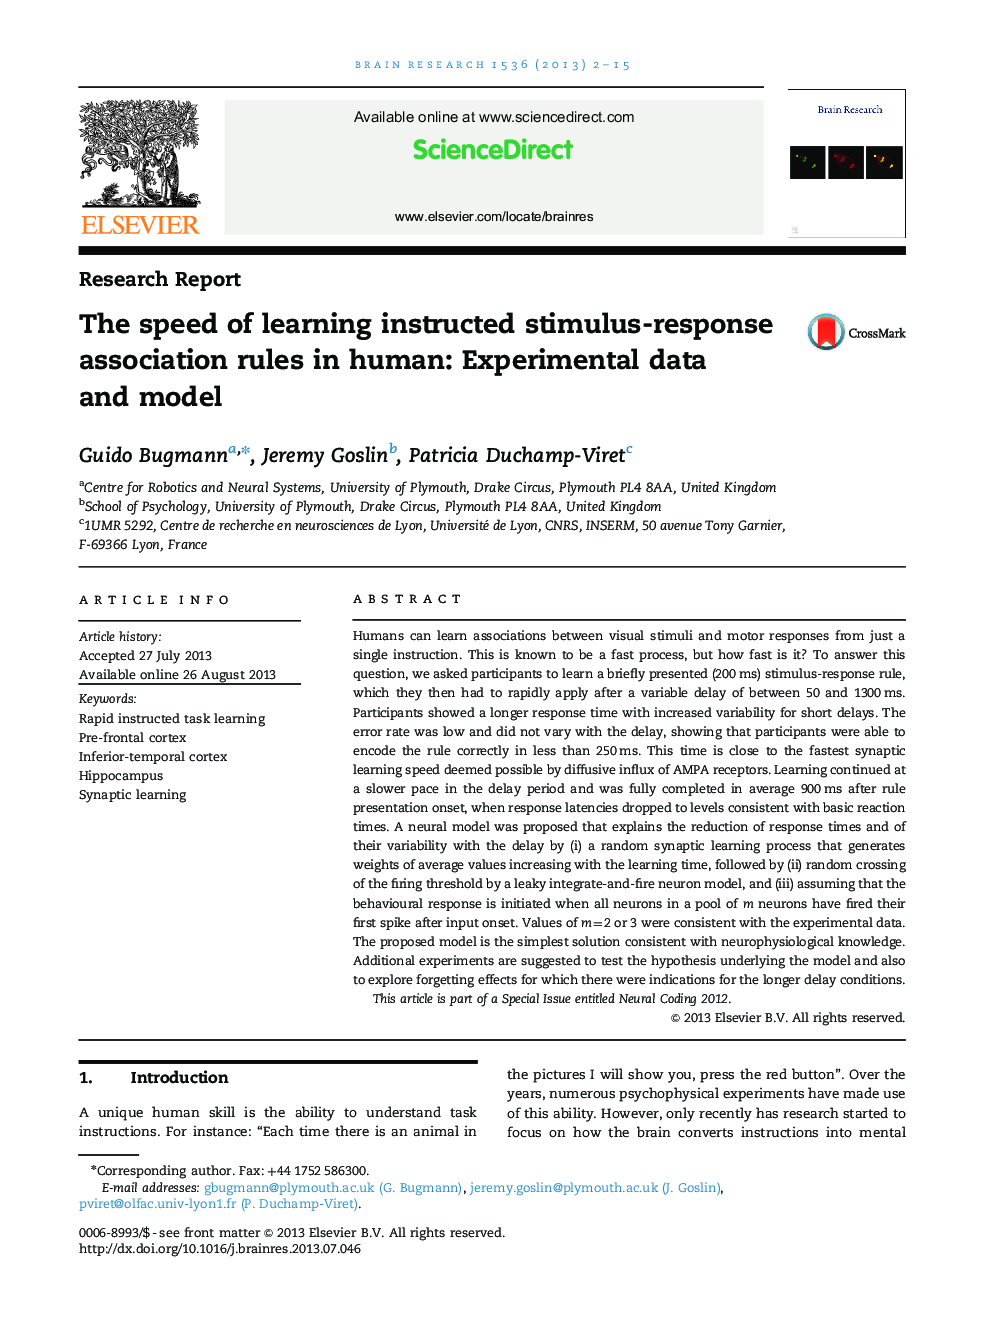 Research ReportThe speed of learning instructed stimulus-response association rules in human: Experimental data and model